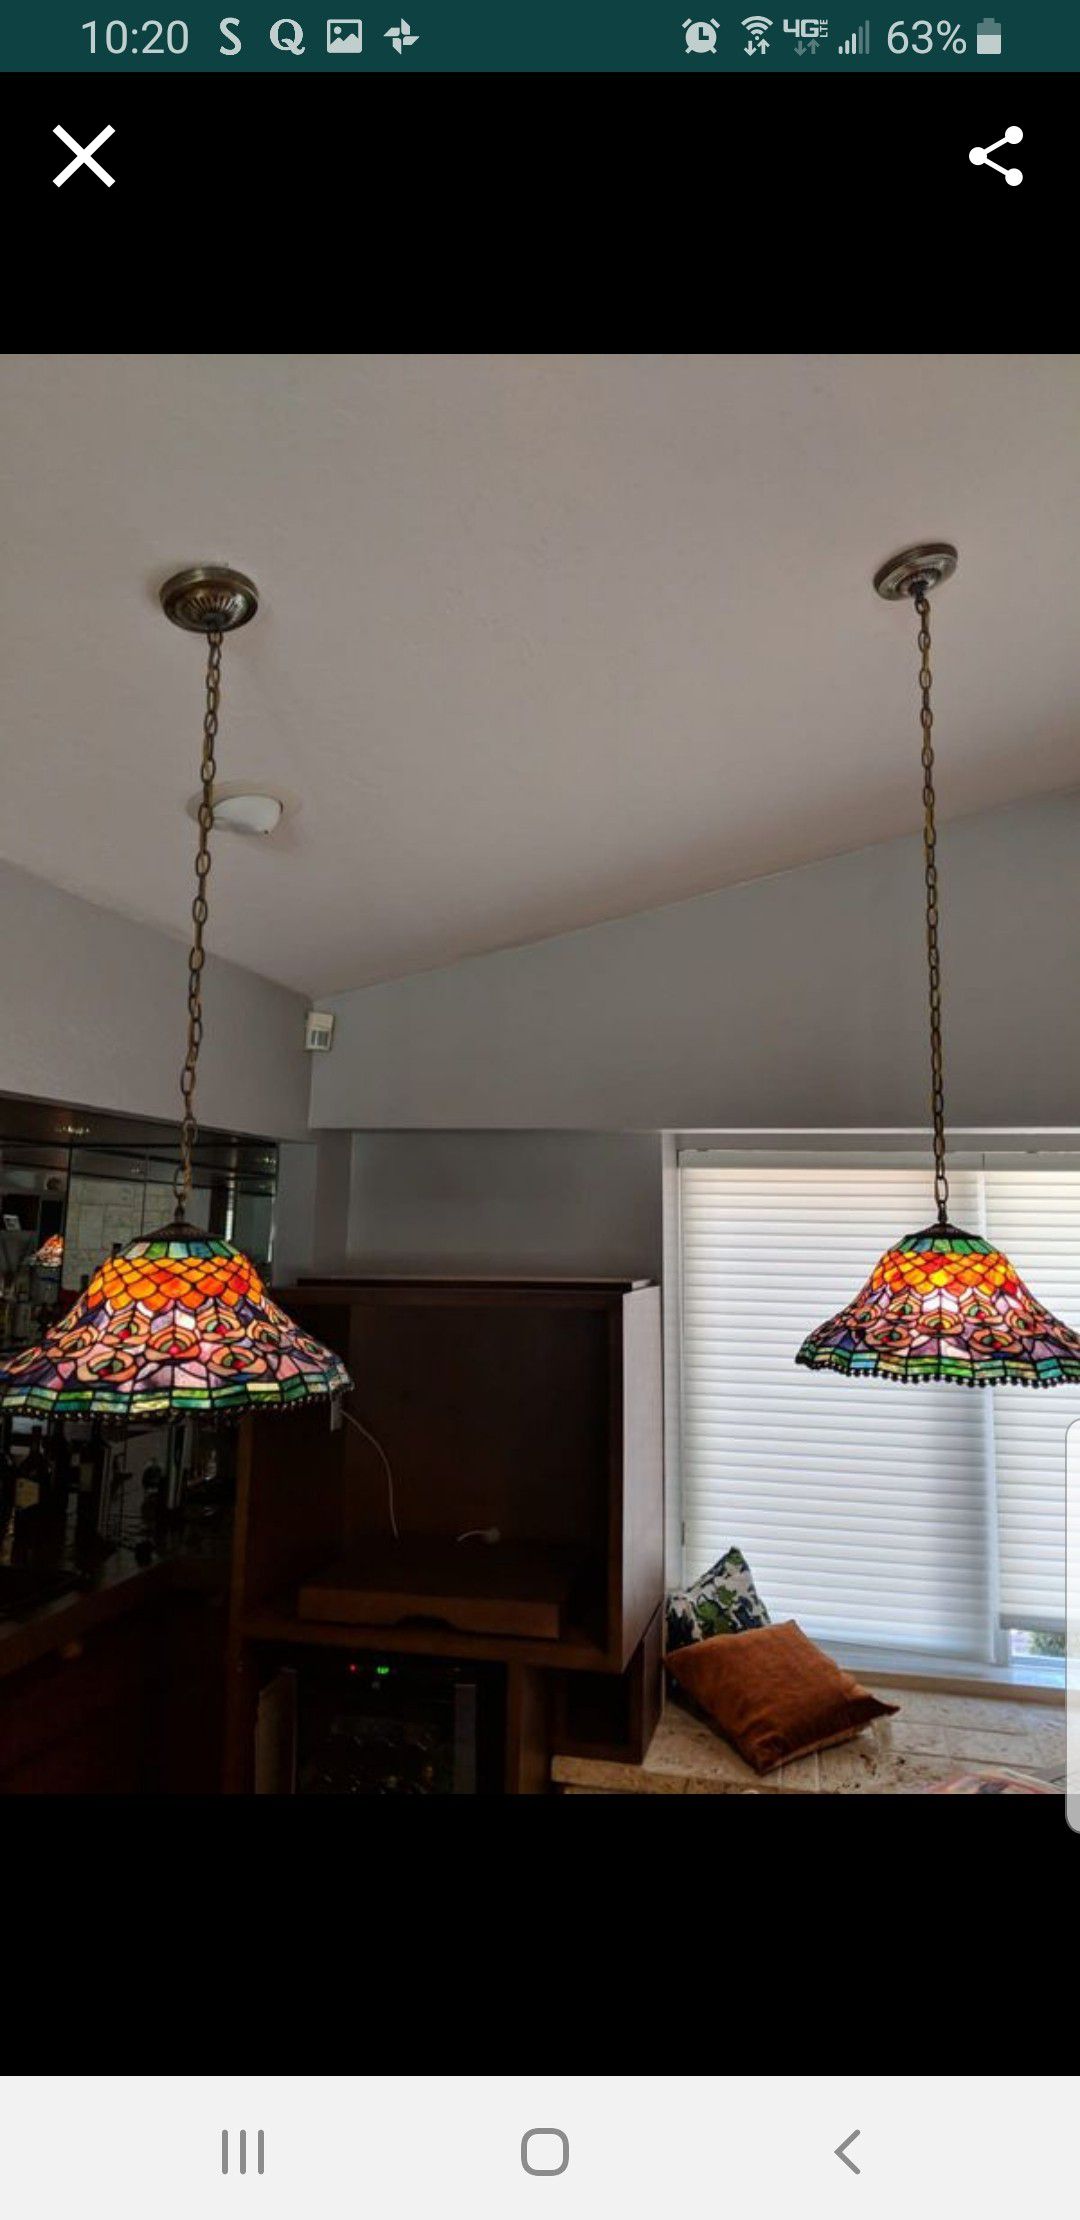 Tiffany stain glass light fixtures